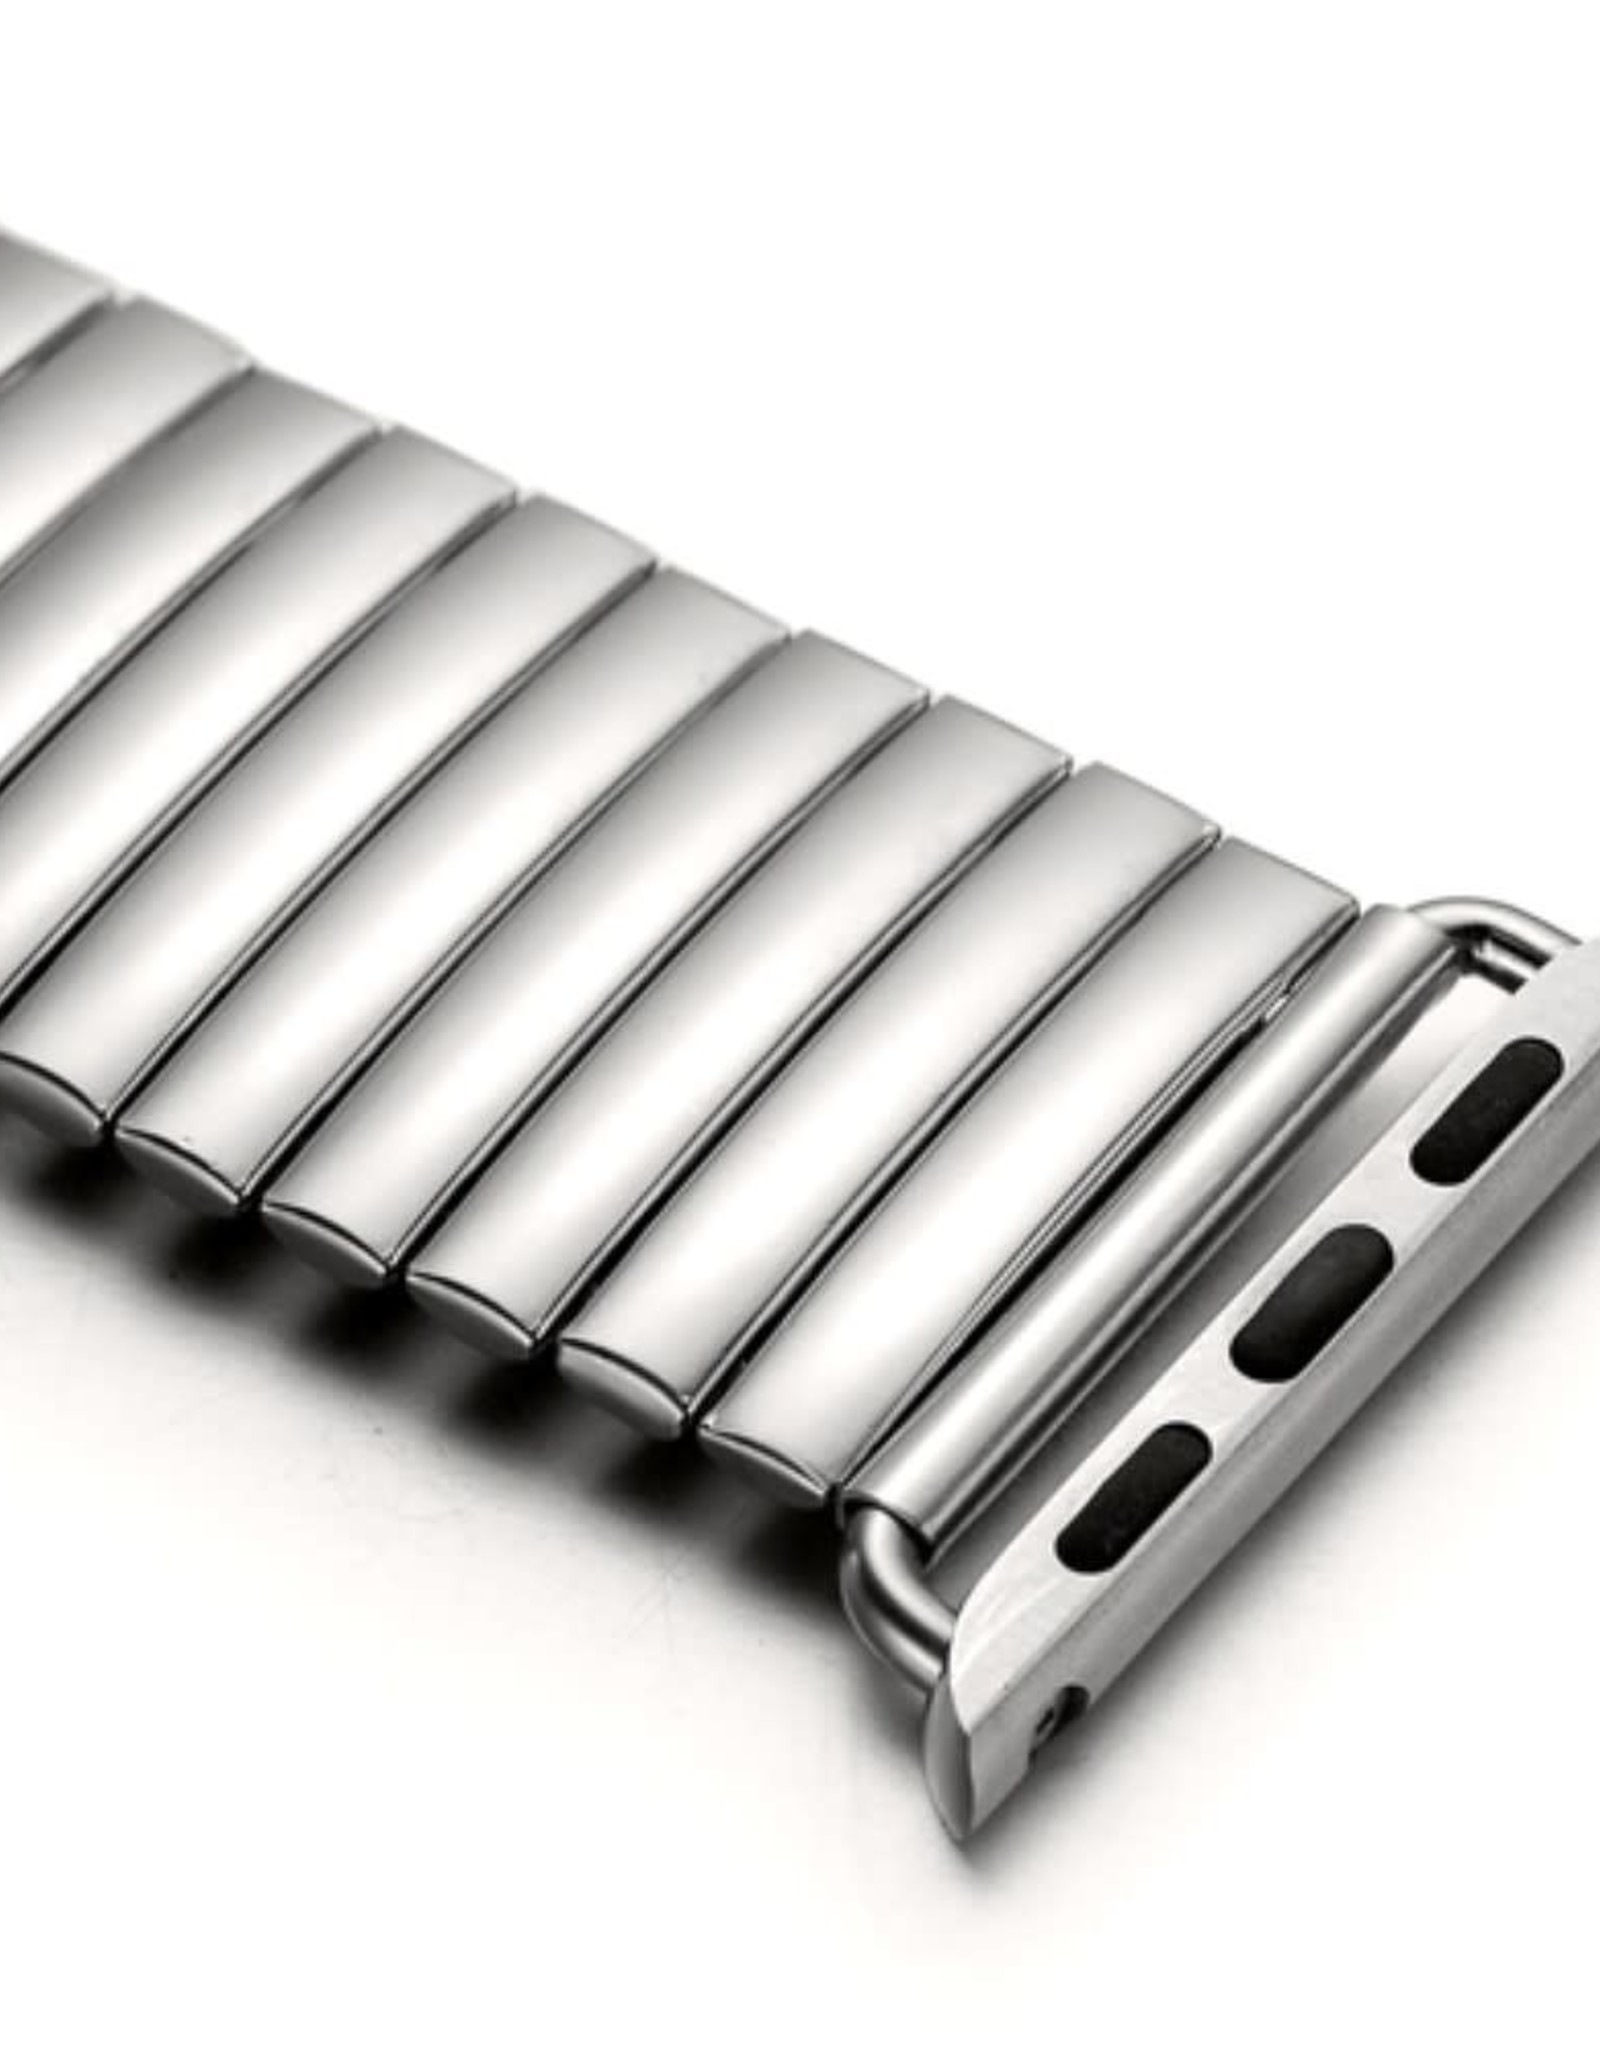 Flexible Stainless Steel Watch Band for Apple Watch Series 5/4 40mm / Series 3/2/1 38mm